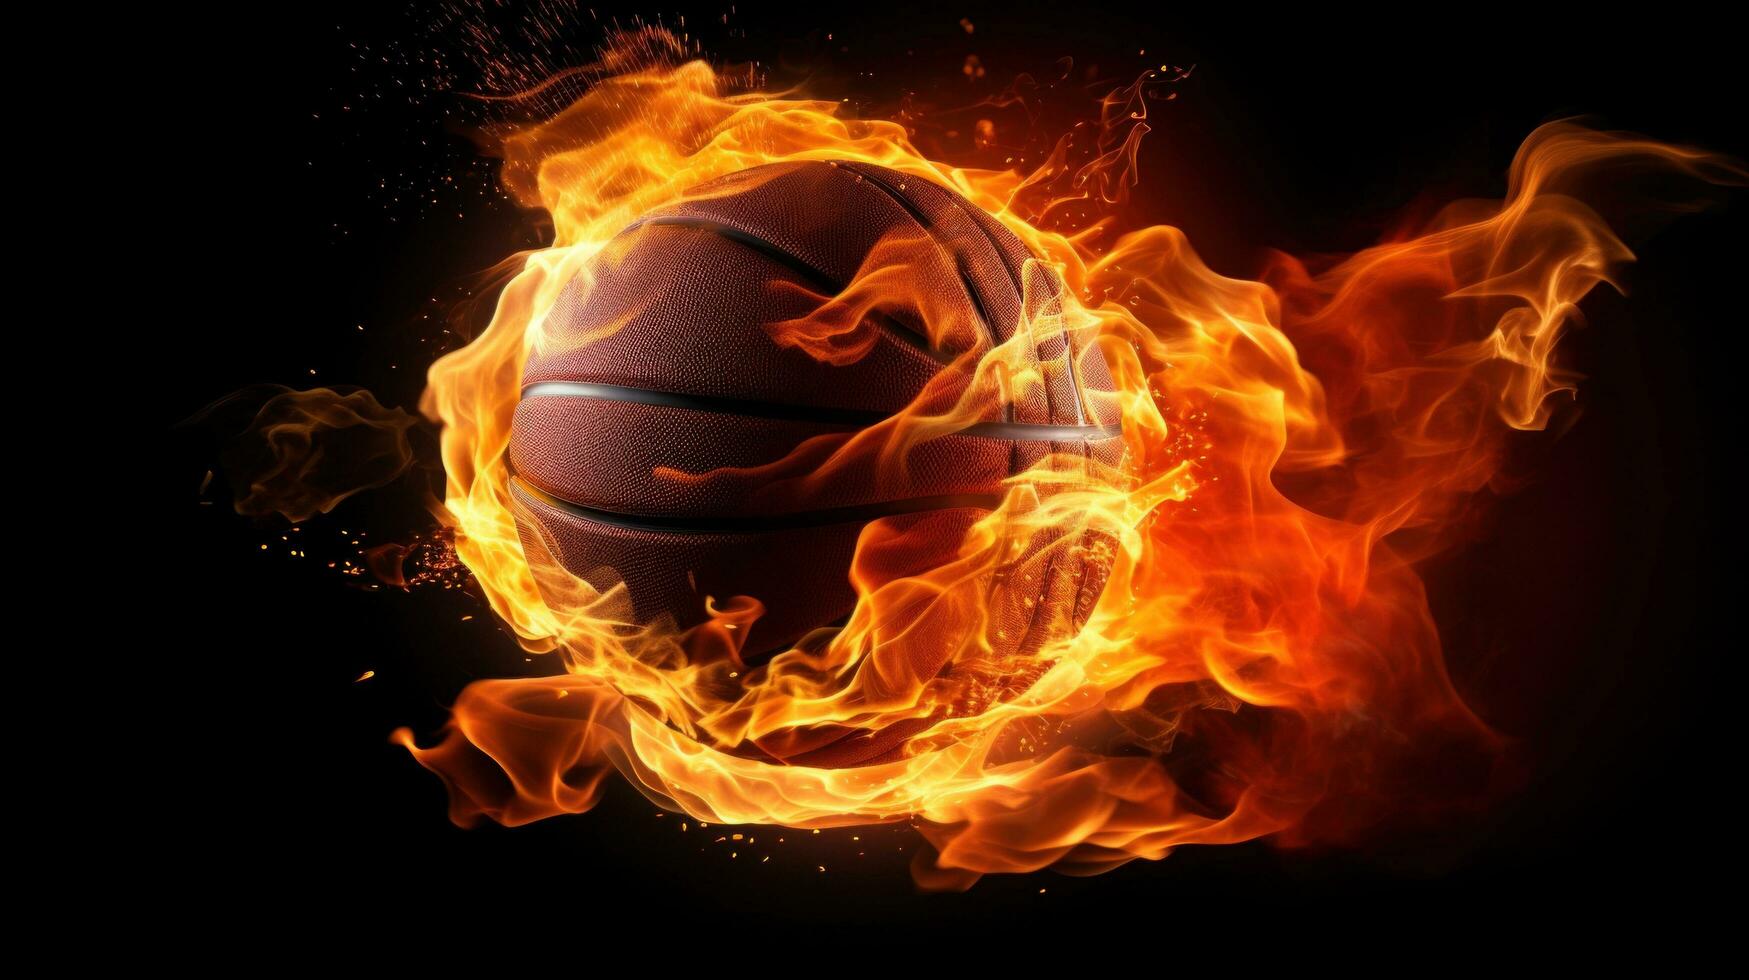 AI generated a basketball ball on fire, representing passion and energy, great for creative or dramatic designs photo